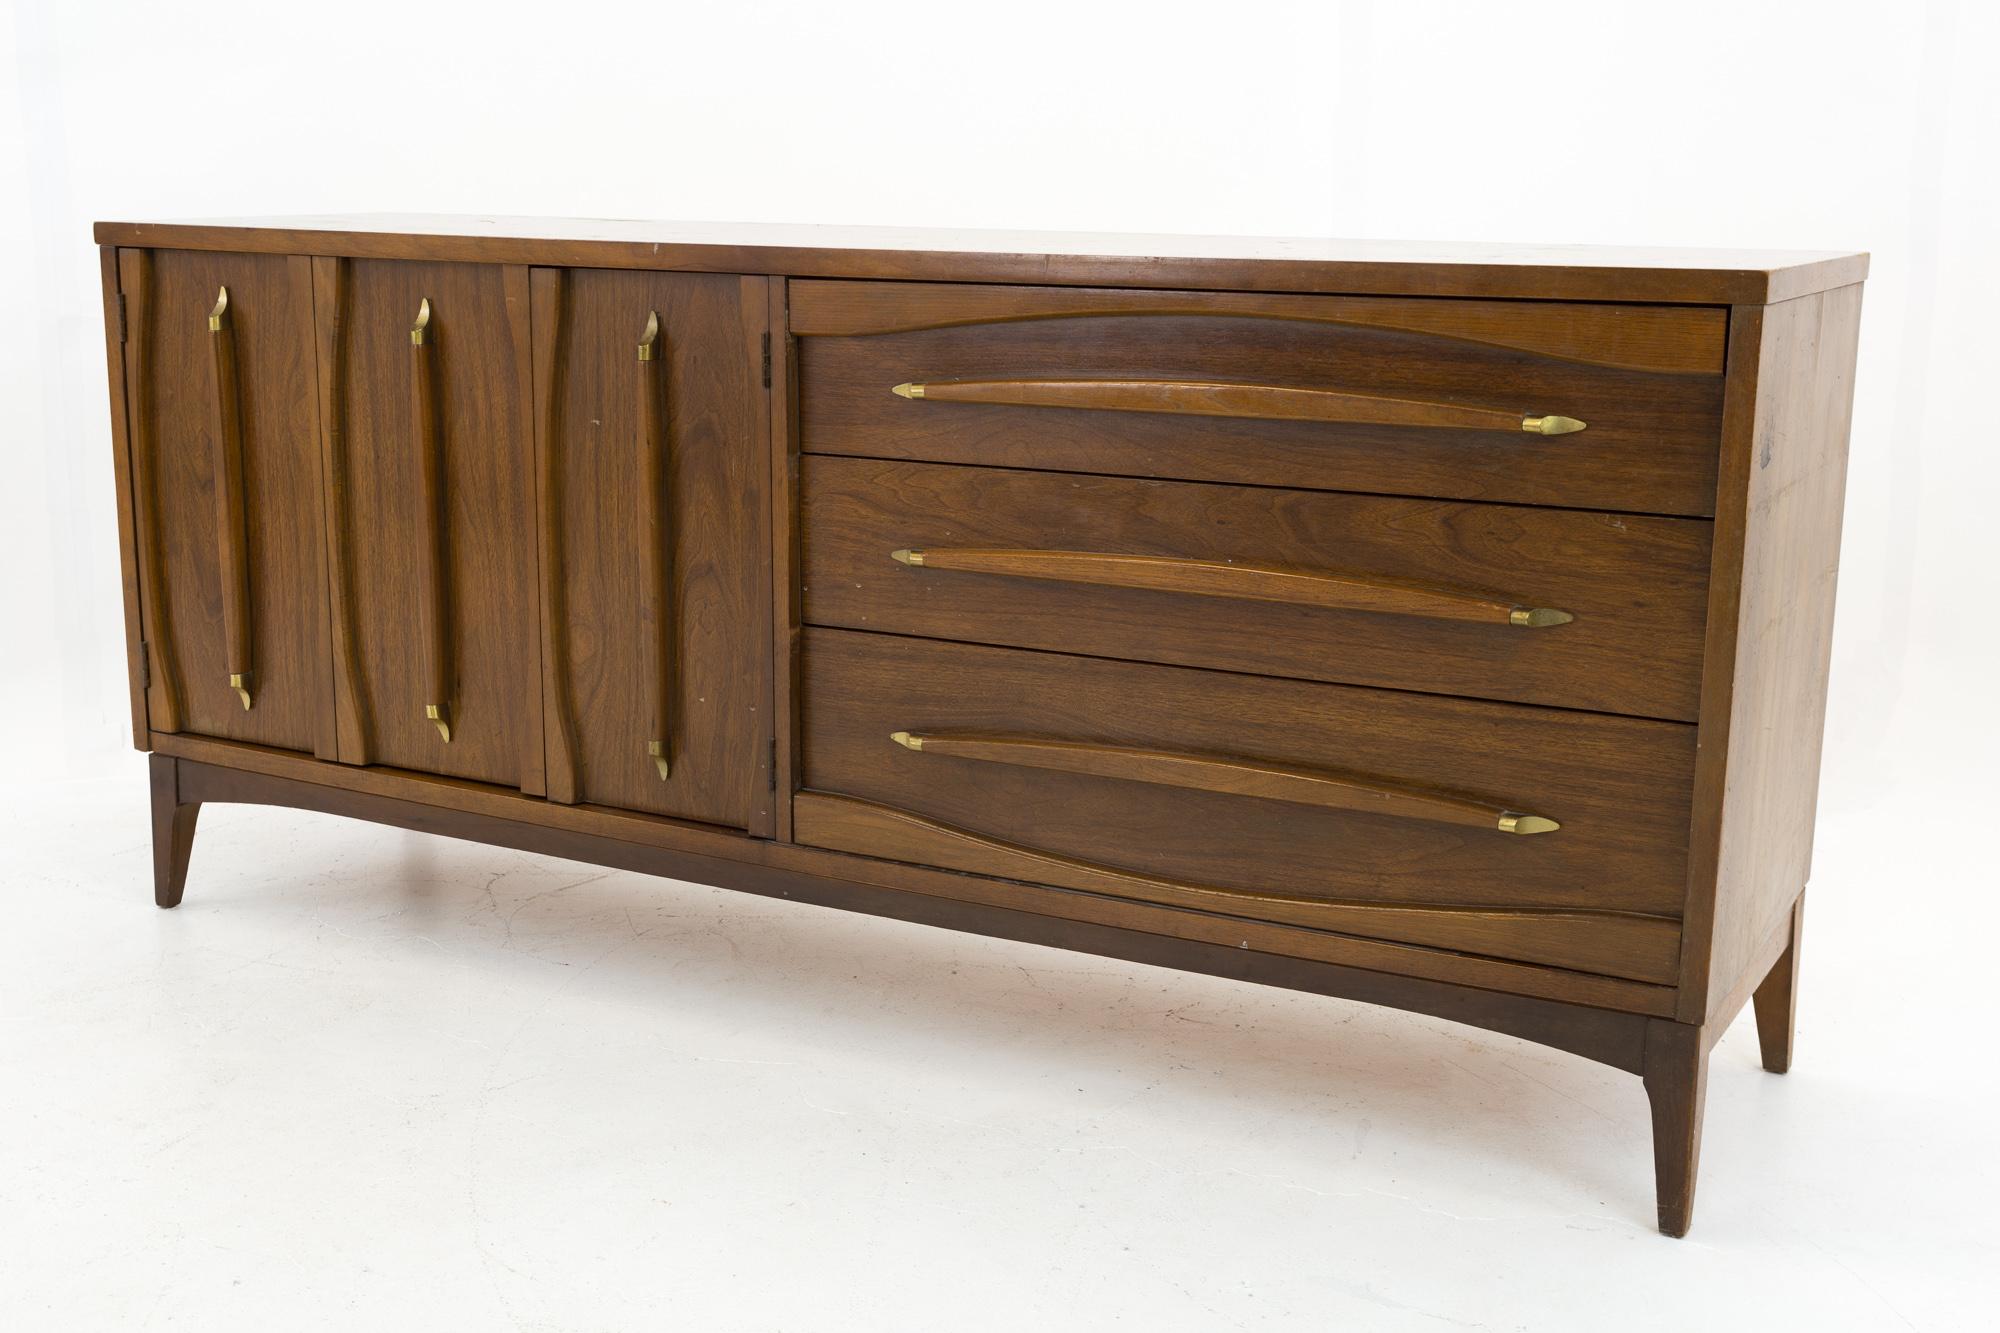 Kroehler walnut and brass mid century lowboy dresser with mirror
Dresser and mirror are: 70 wide x 18 deep x 31 inches high

All pieces of furniture can be had in what we call restored vintage condition. That means the piece is restored upon